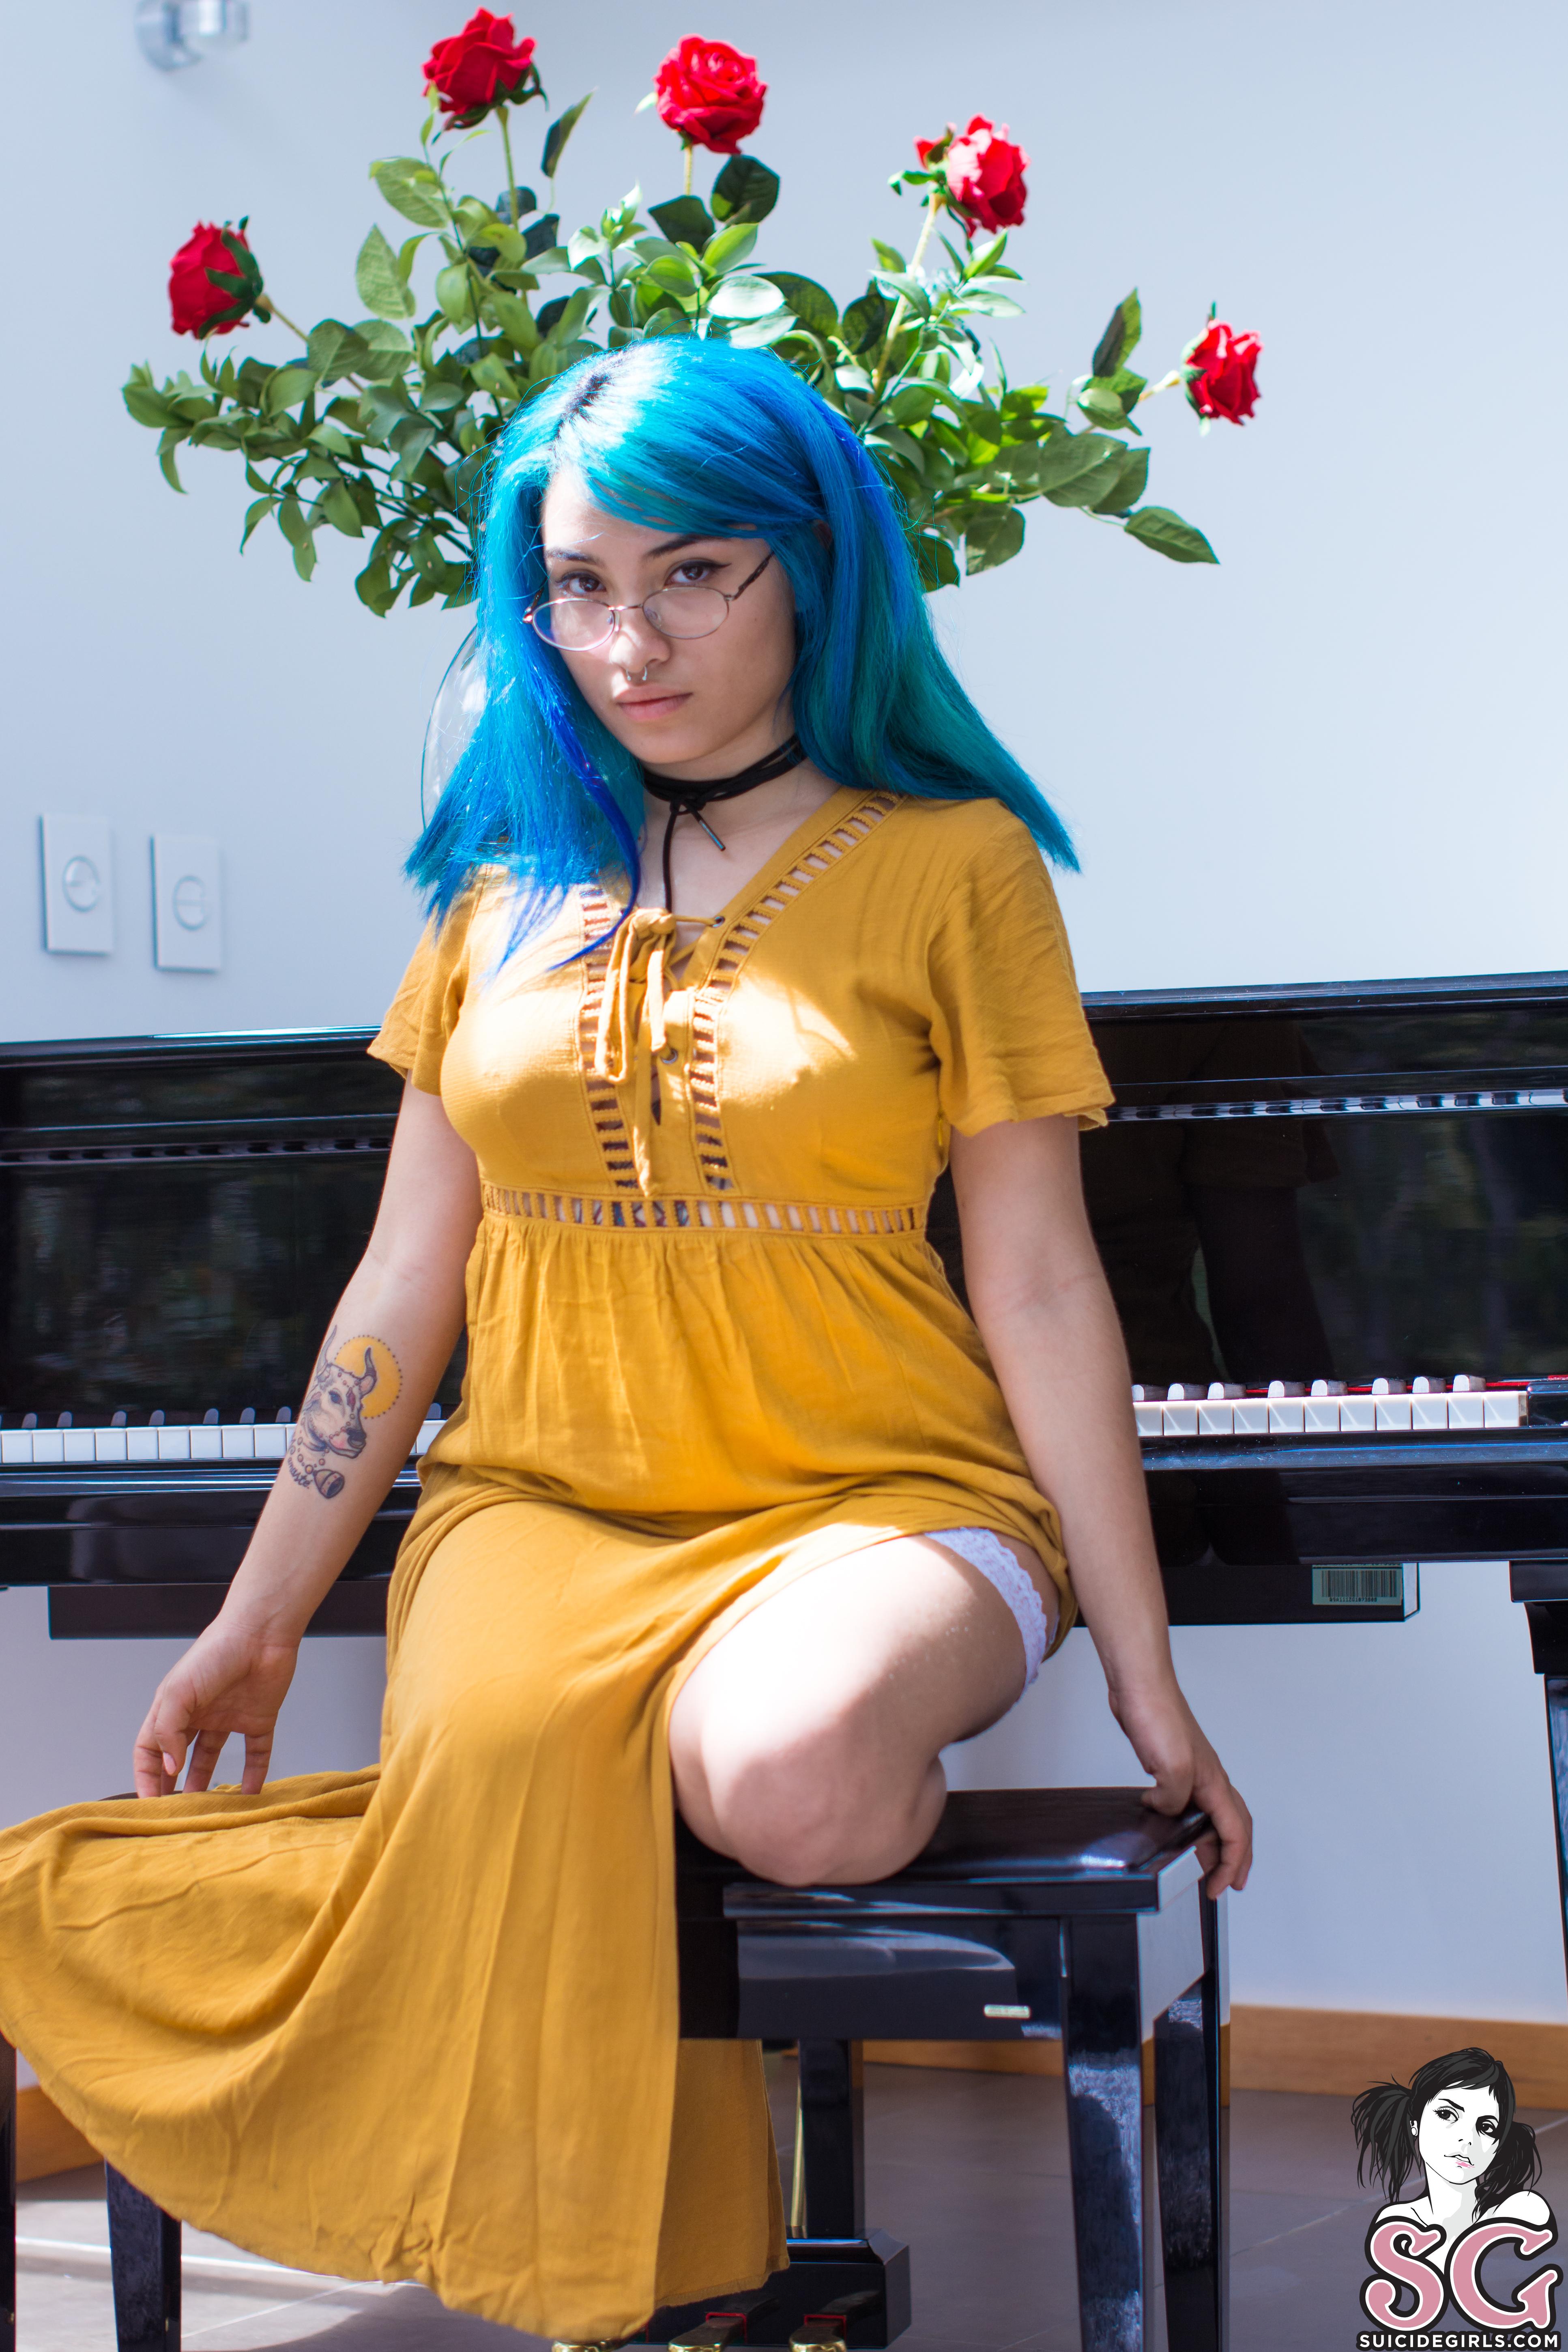 People 3866x5799 Suicide Girls tattoo women dress glasses piano blue hair Redaura women with glasses dyed hair pierced septum